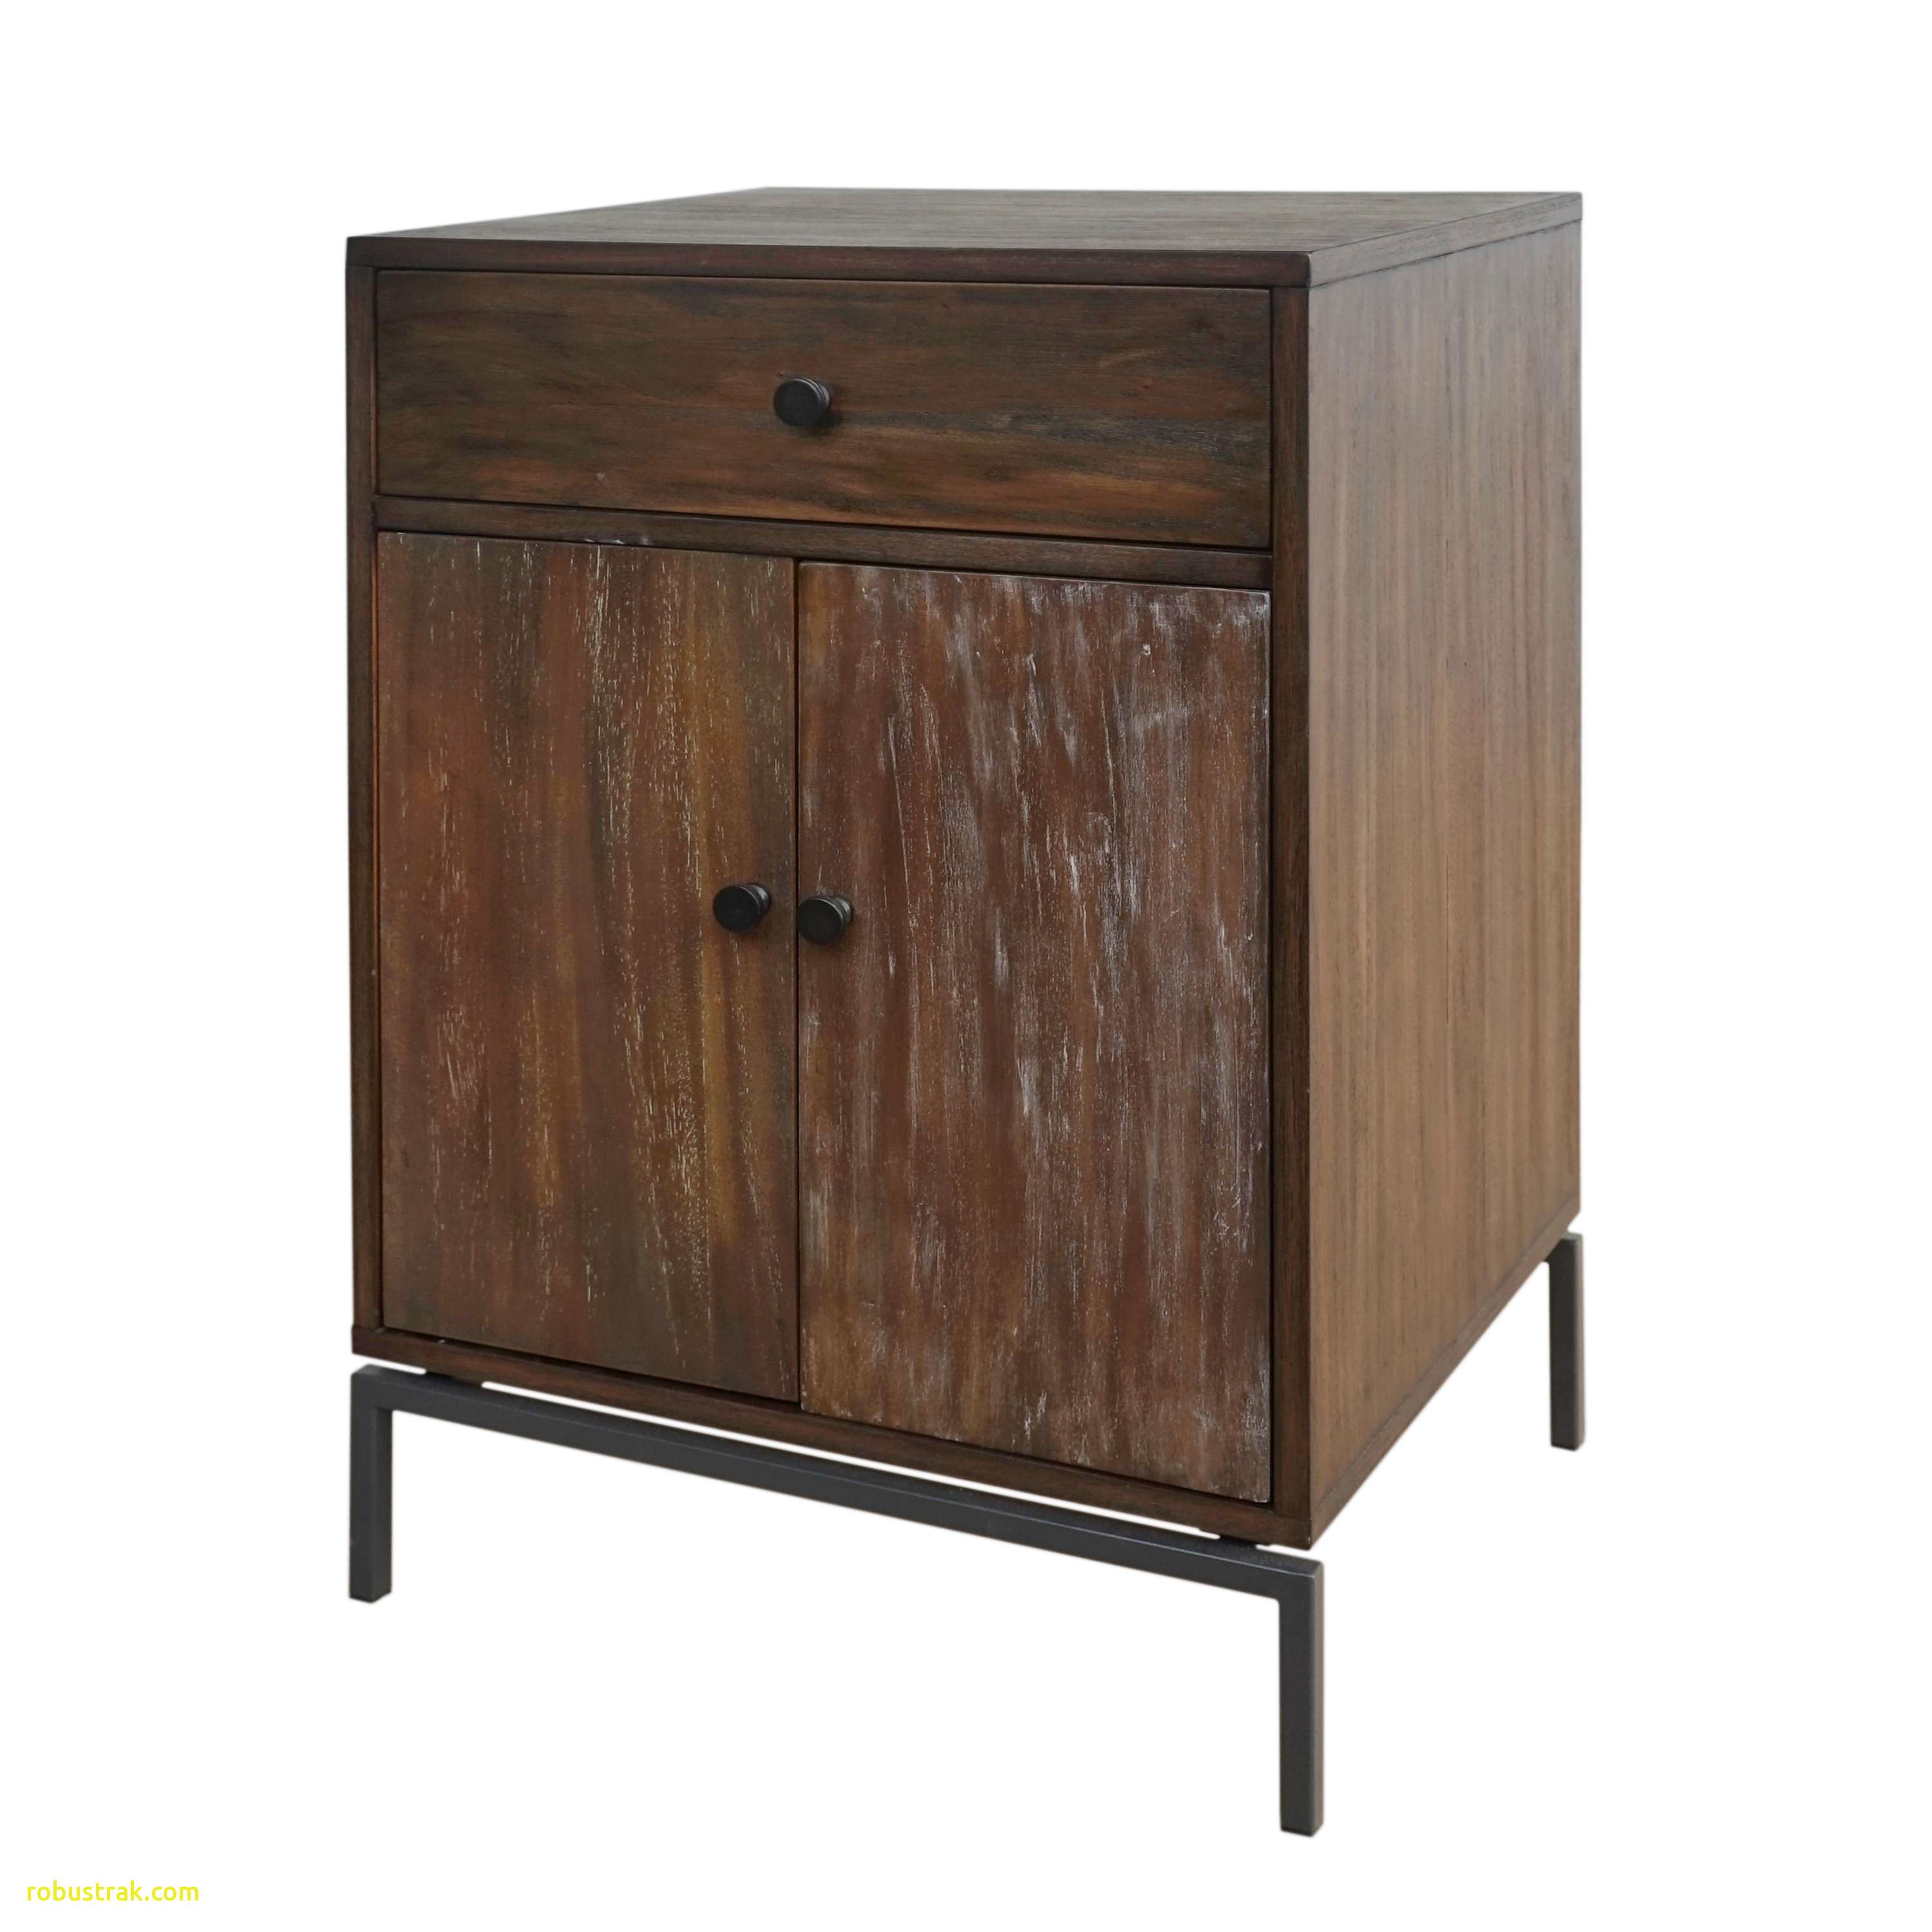 rustic accent chest inspirational new ari small cabinet drawer doors natural table patio furniture winnipeg modern square end industrial wood grey lamp inch round tablecloth